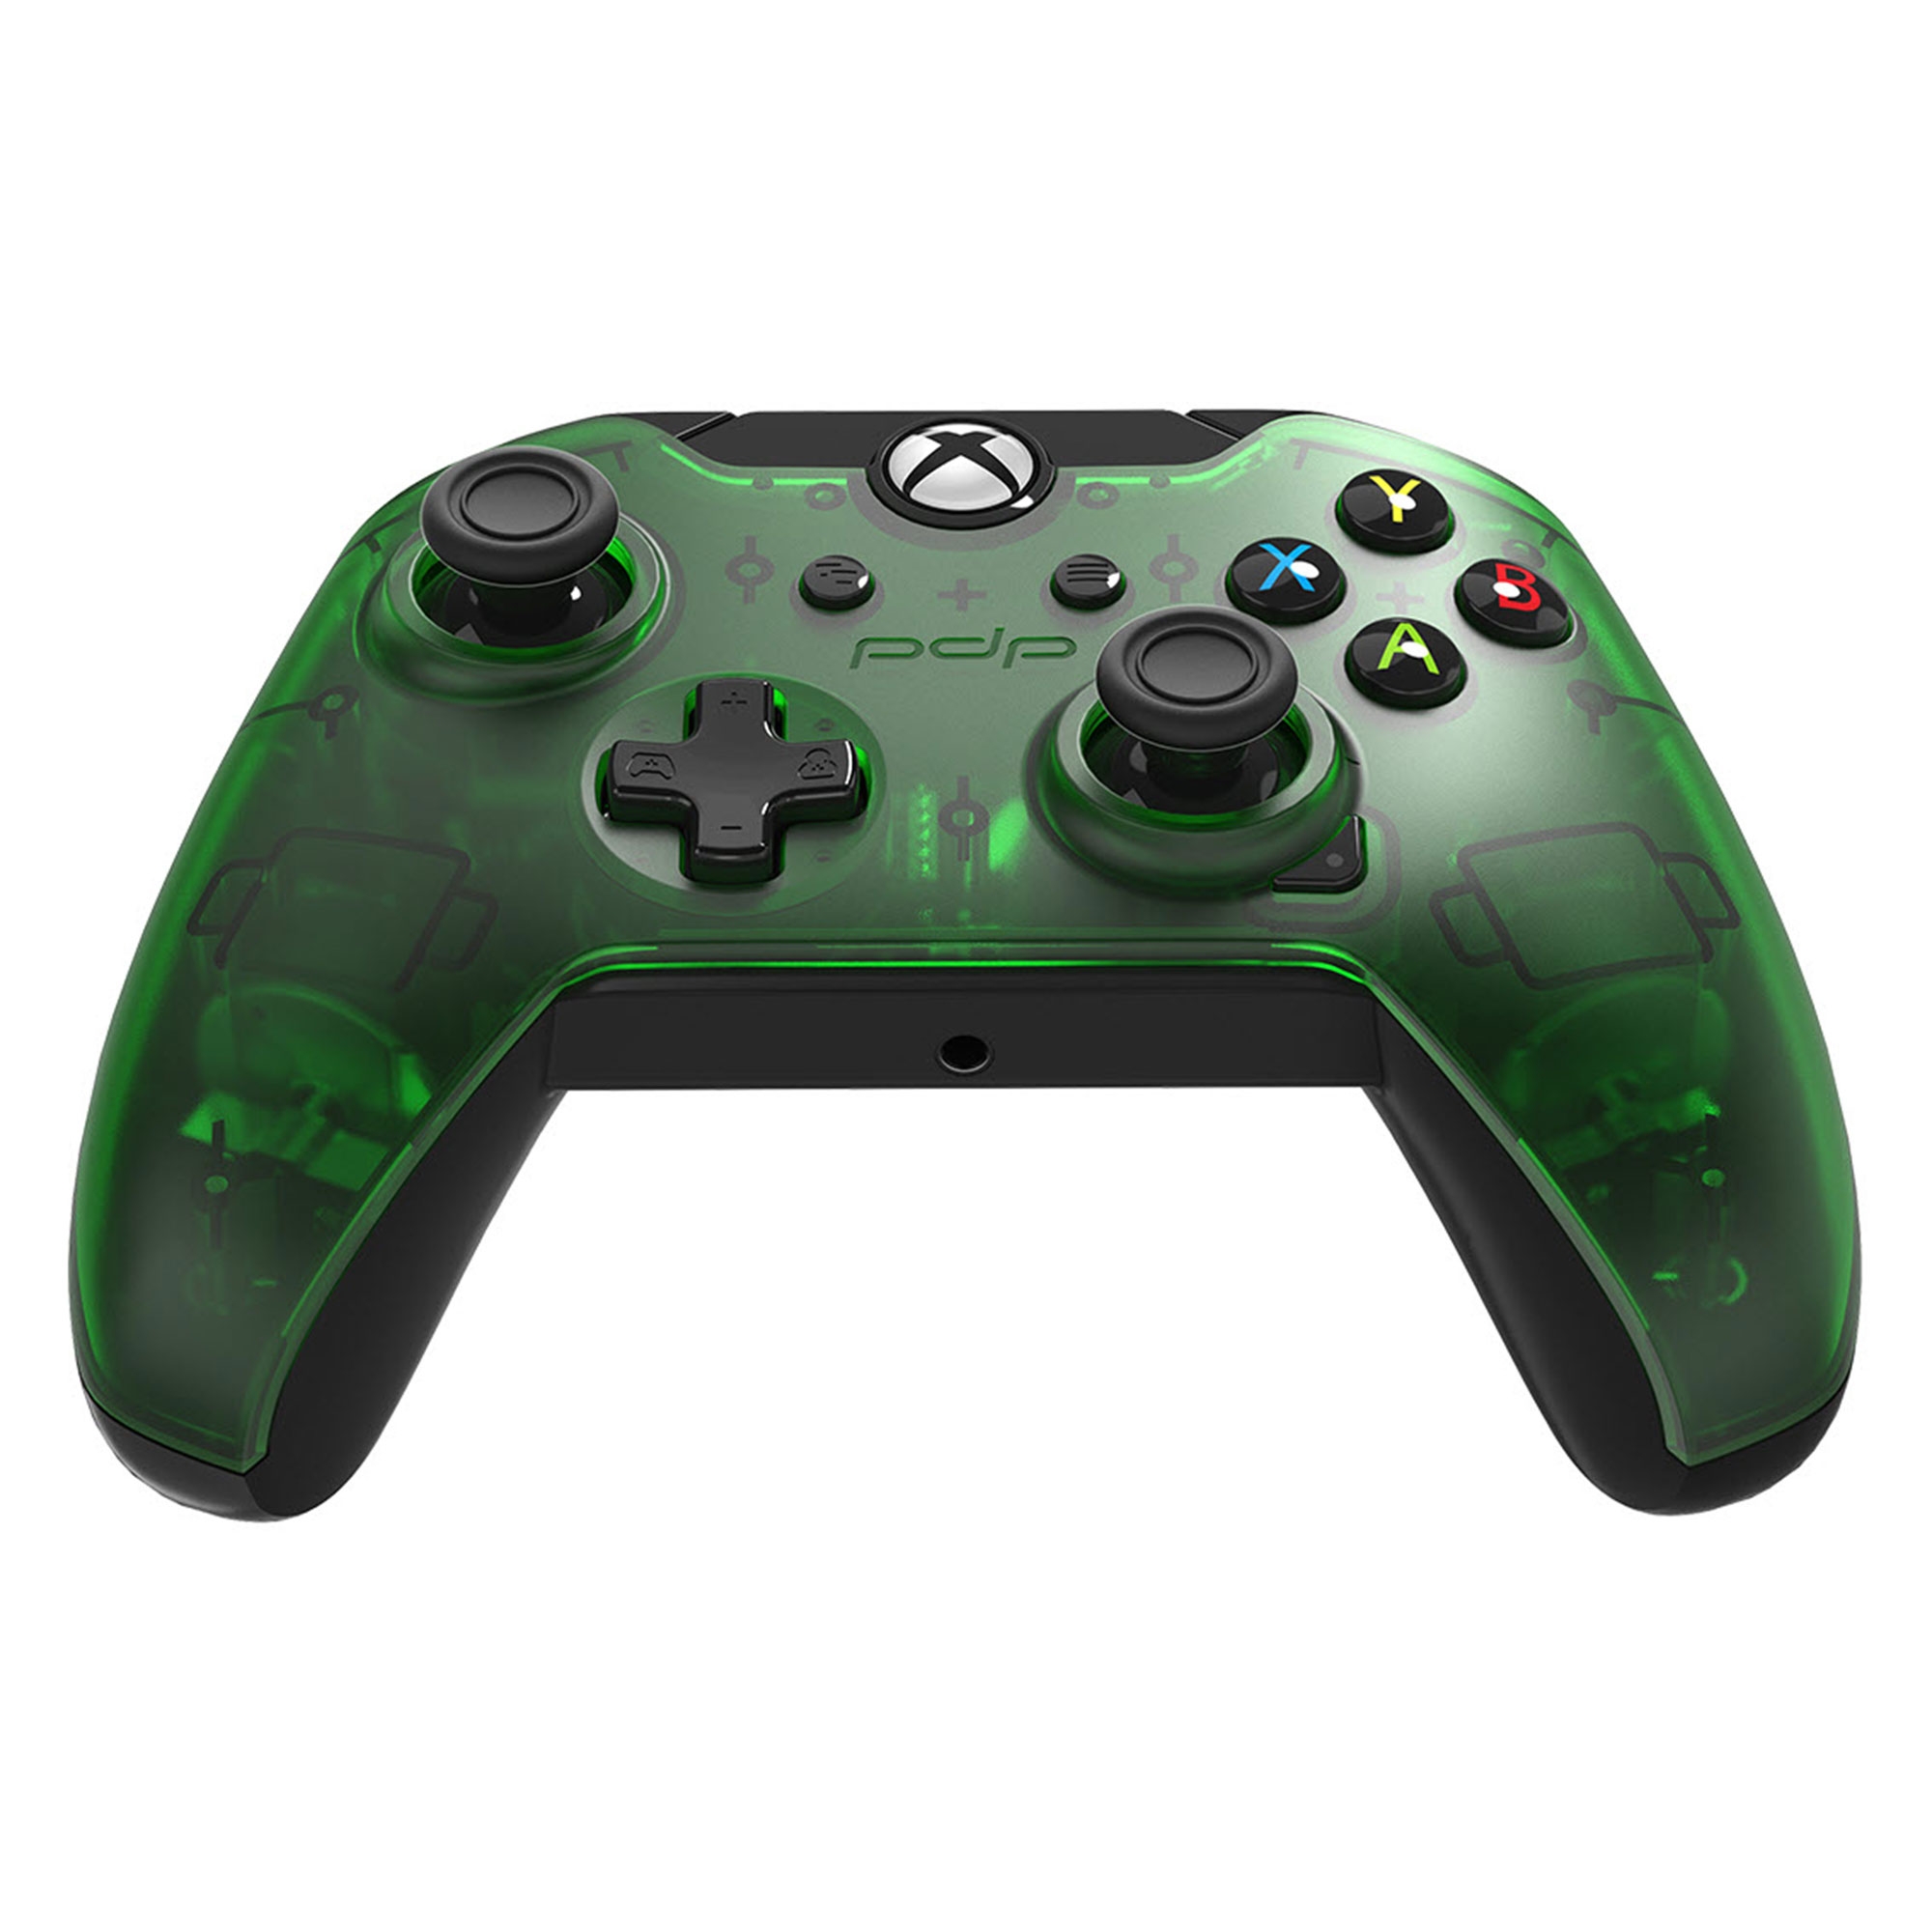 xbox one controller 3.5 mm